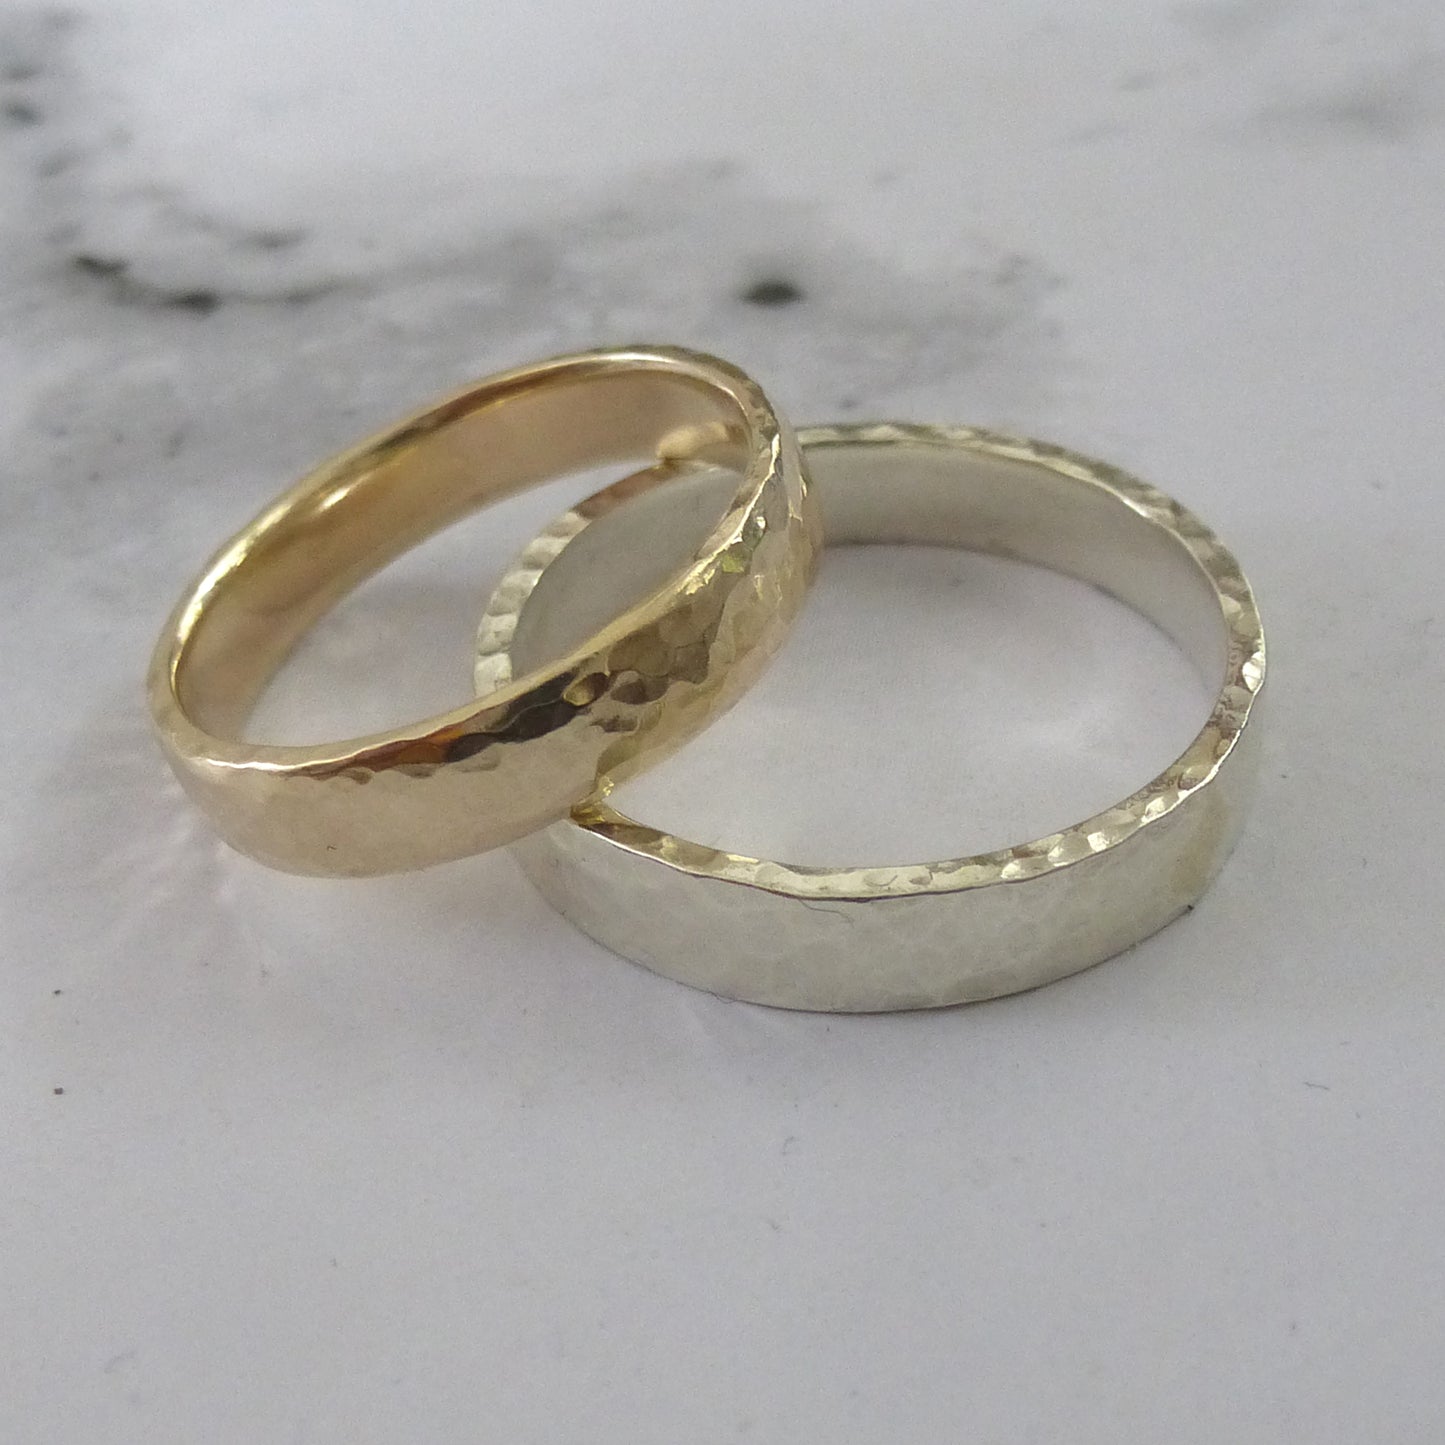 Slim Band Ring in 9ct Gold - 9ct yellow - 4mm - Hammered or Smooth ...